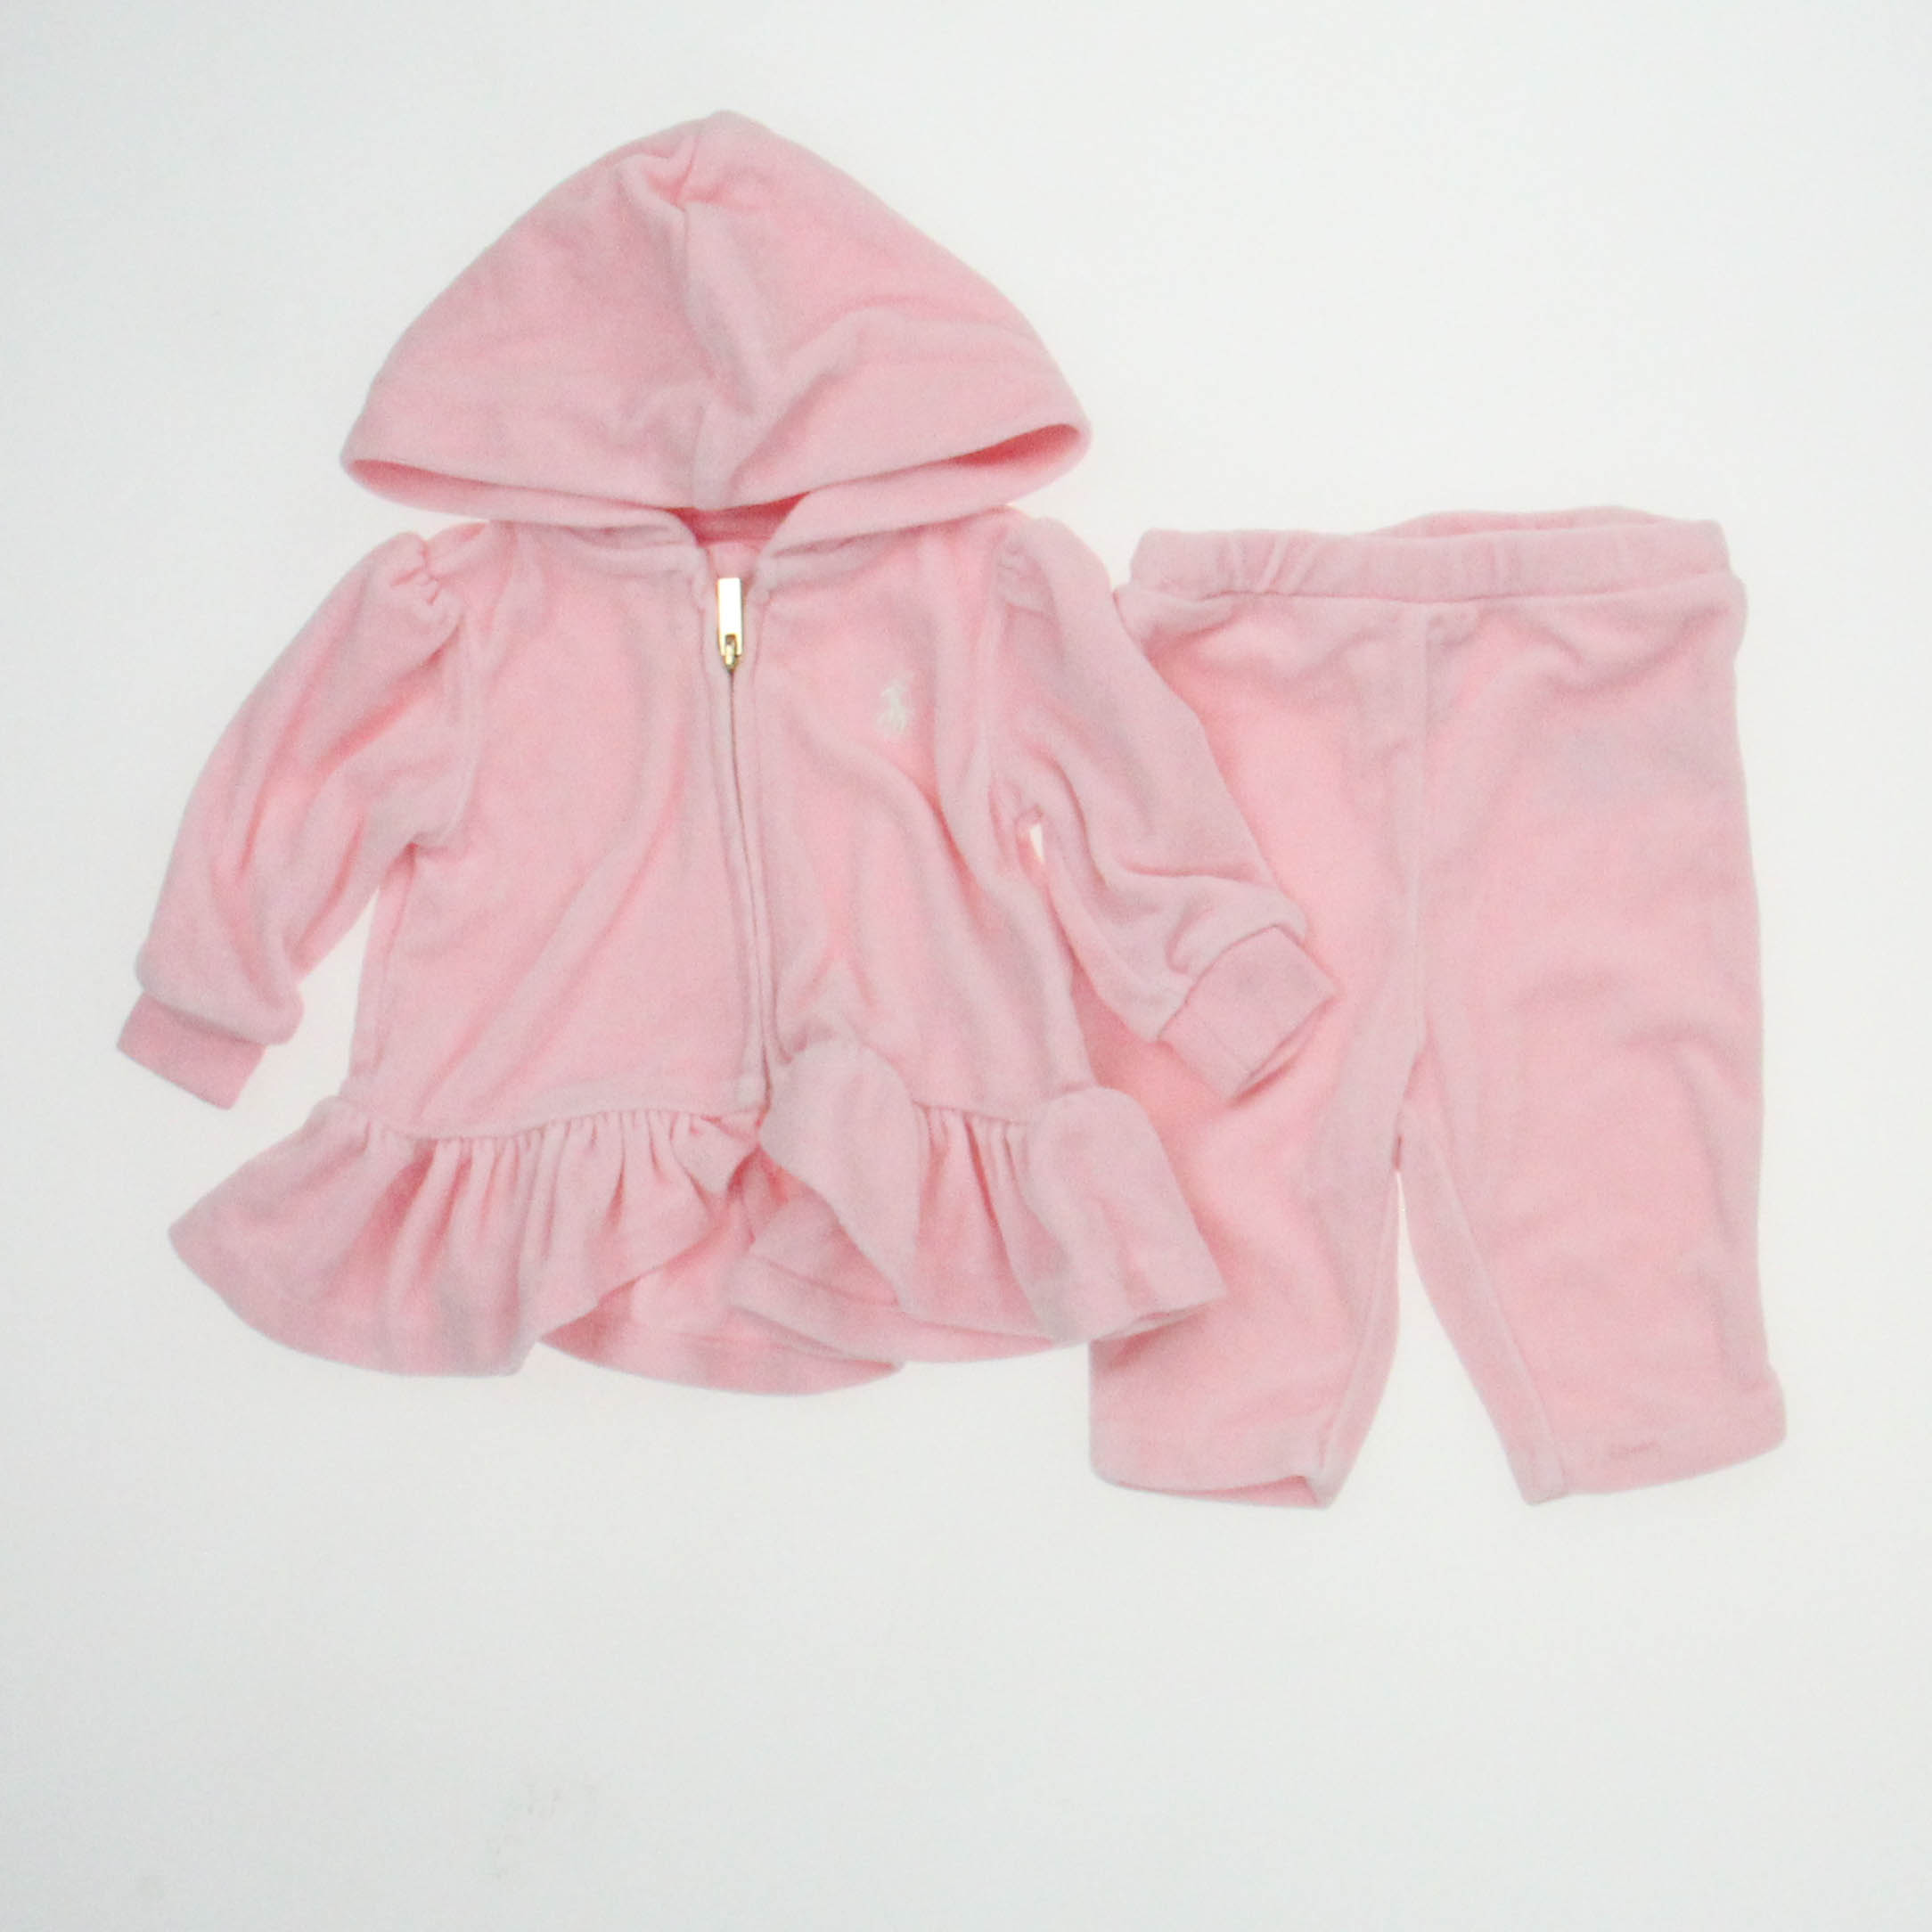 Pre-owned Ralph Lauren Girls Pink Apparel Sets size: 3 Months - image 1 of 1